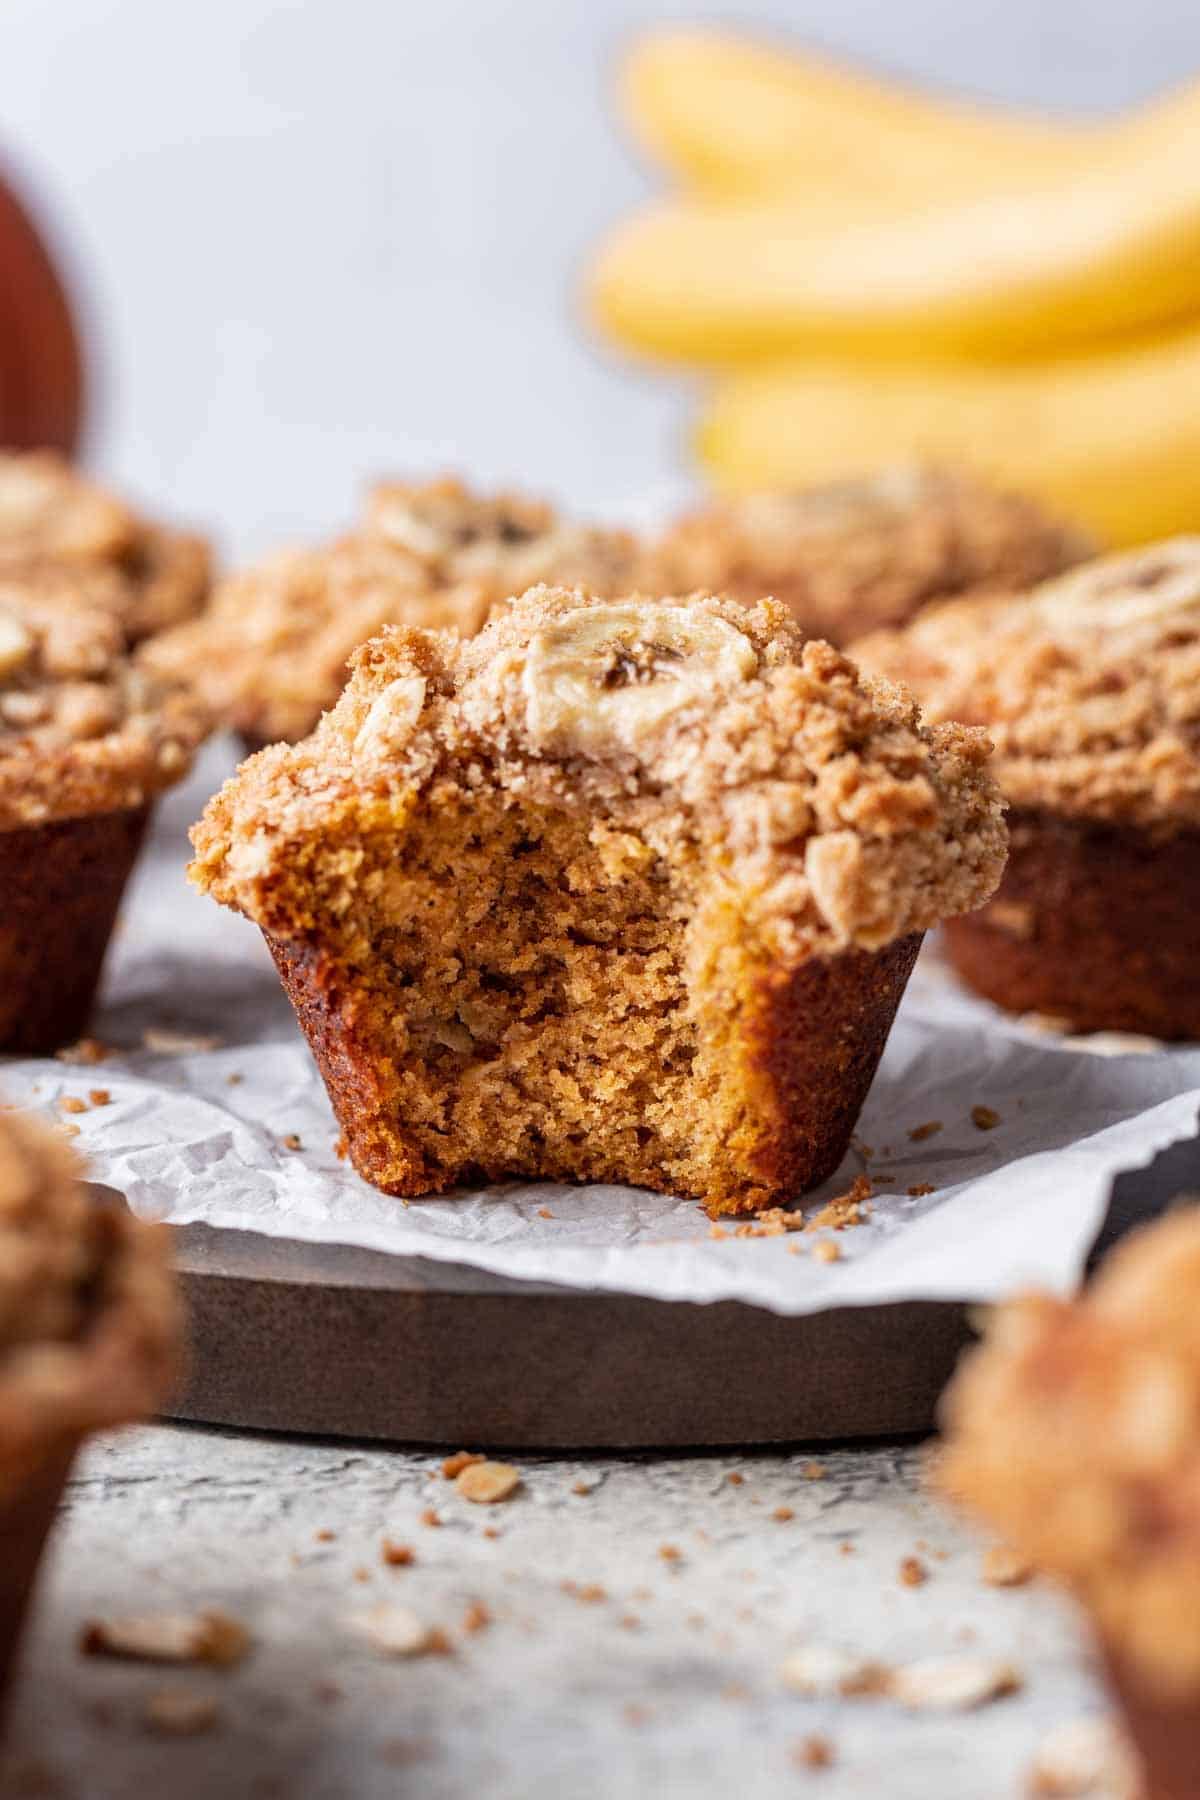 Pumpkin banana muffin with a bite taken out to show the fluffy center.